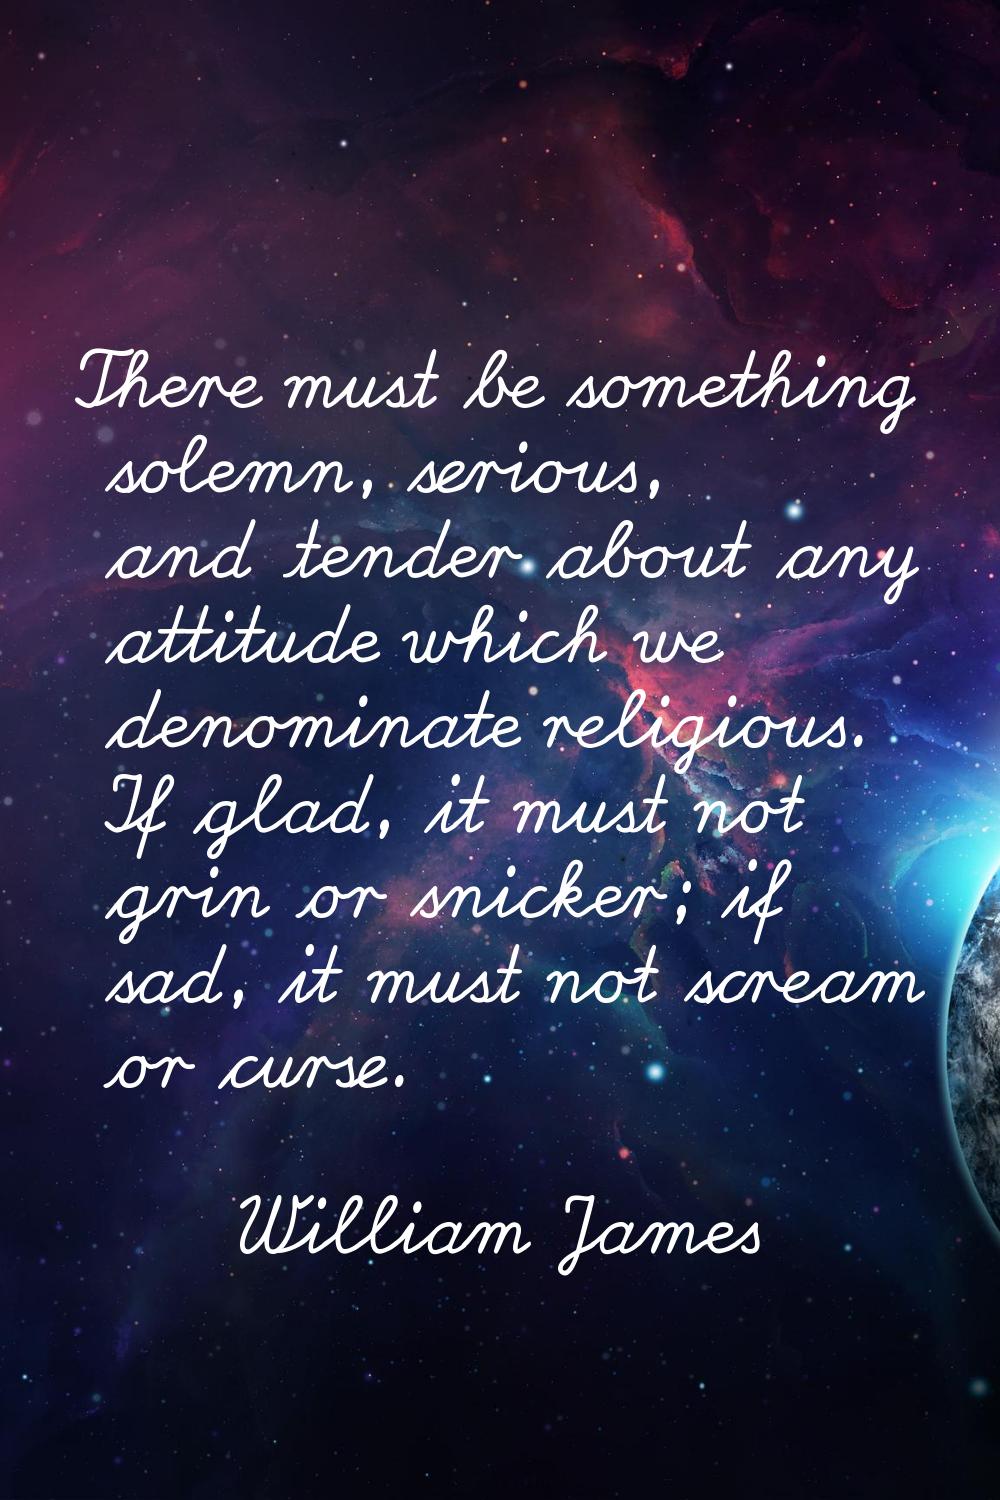 There must be something solemn, serious, and tender about any attitude which we denominate religiou